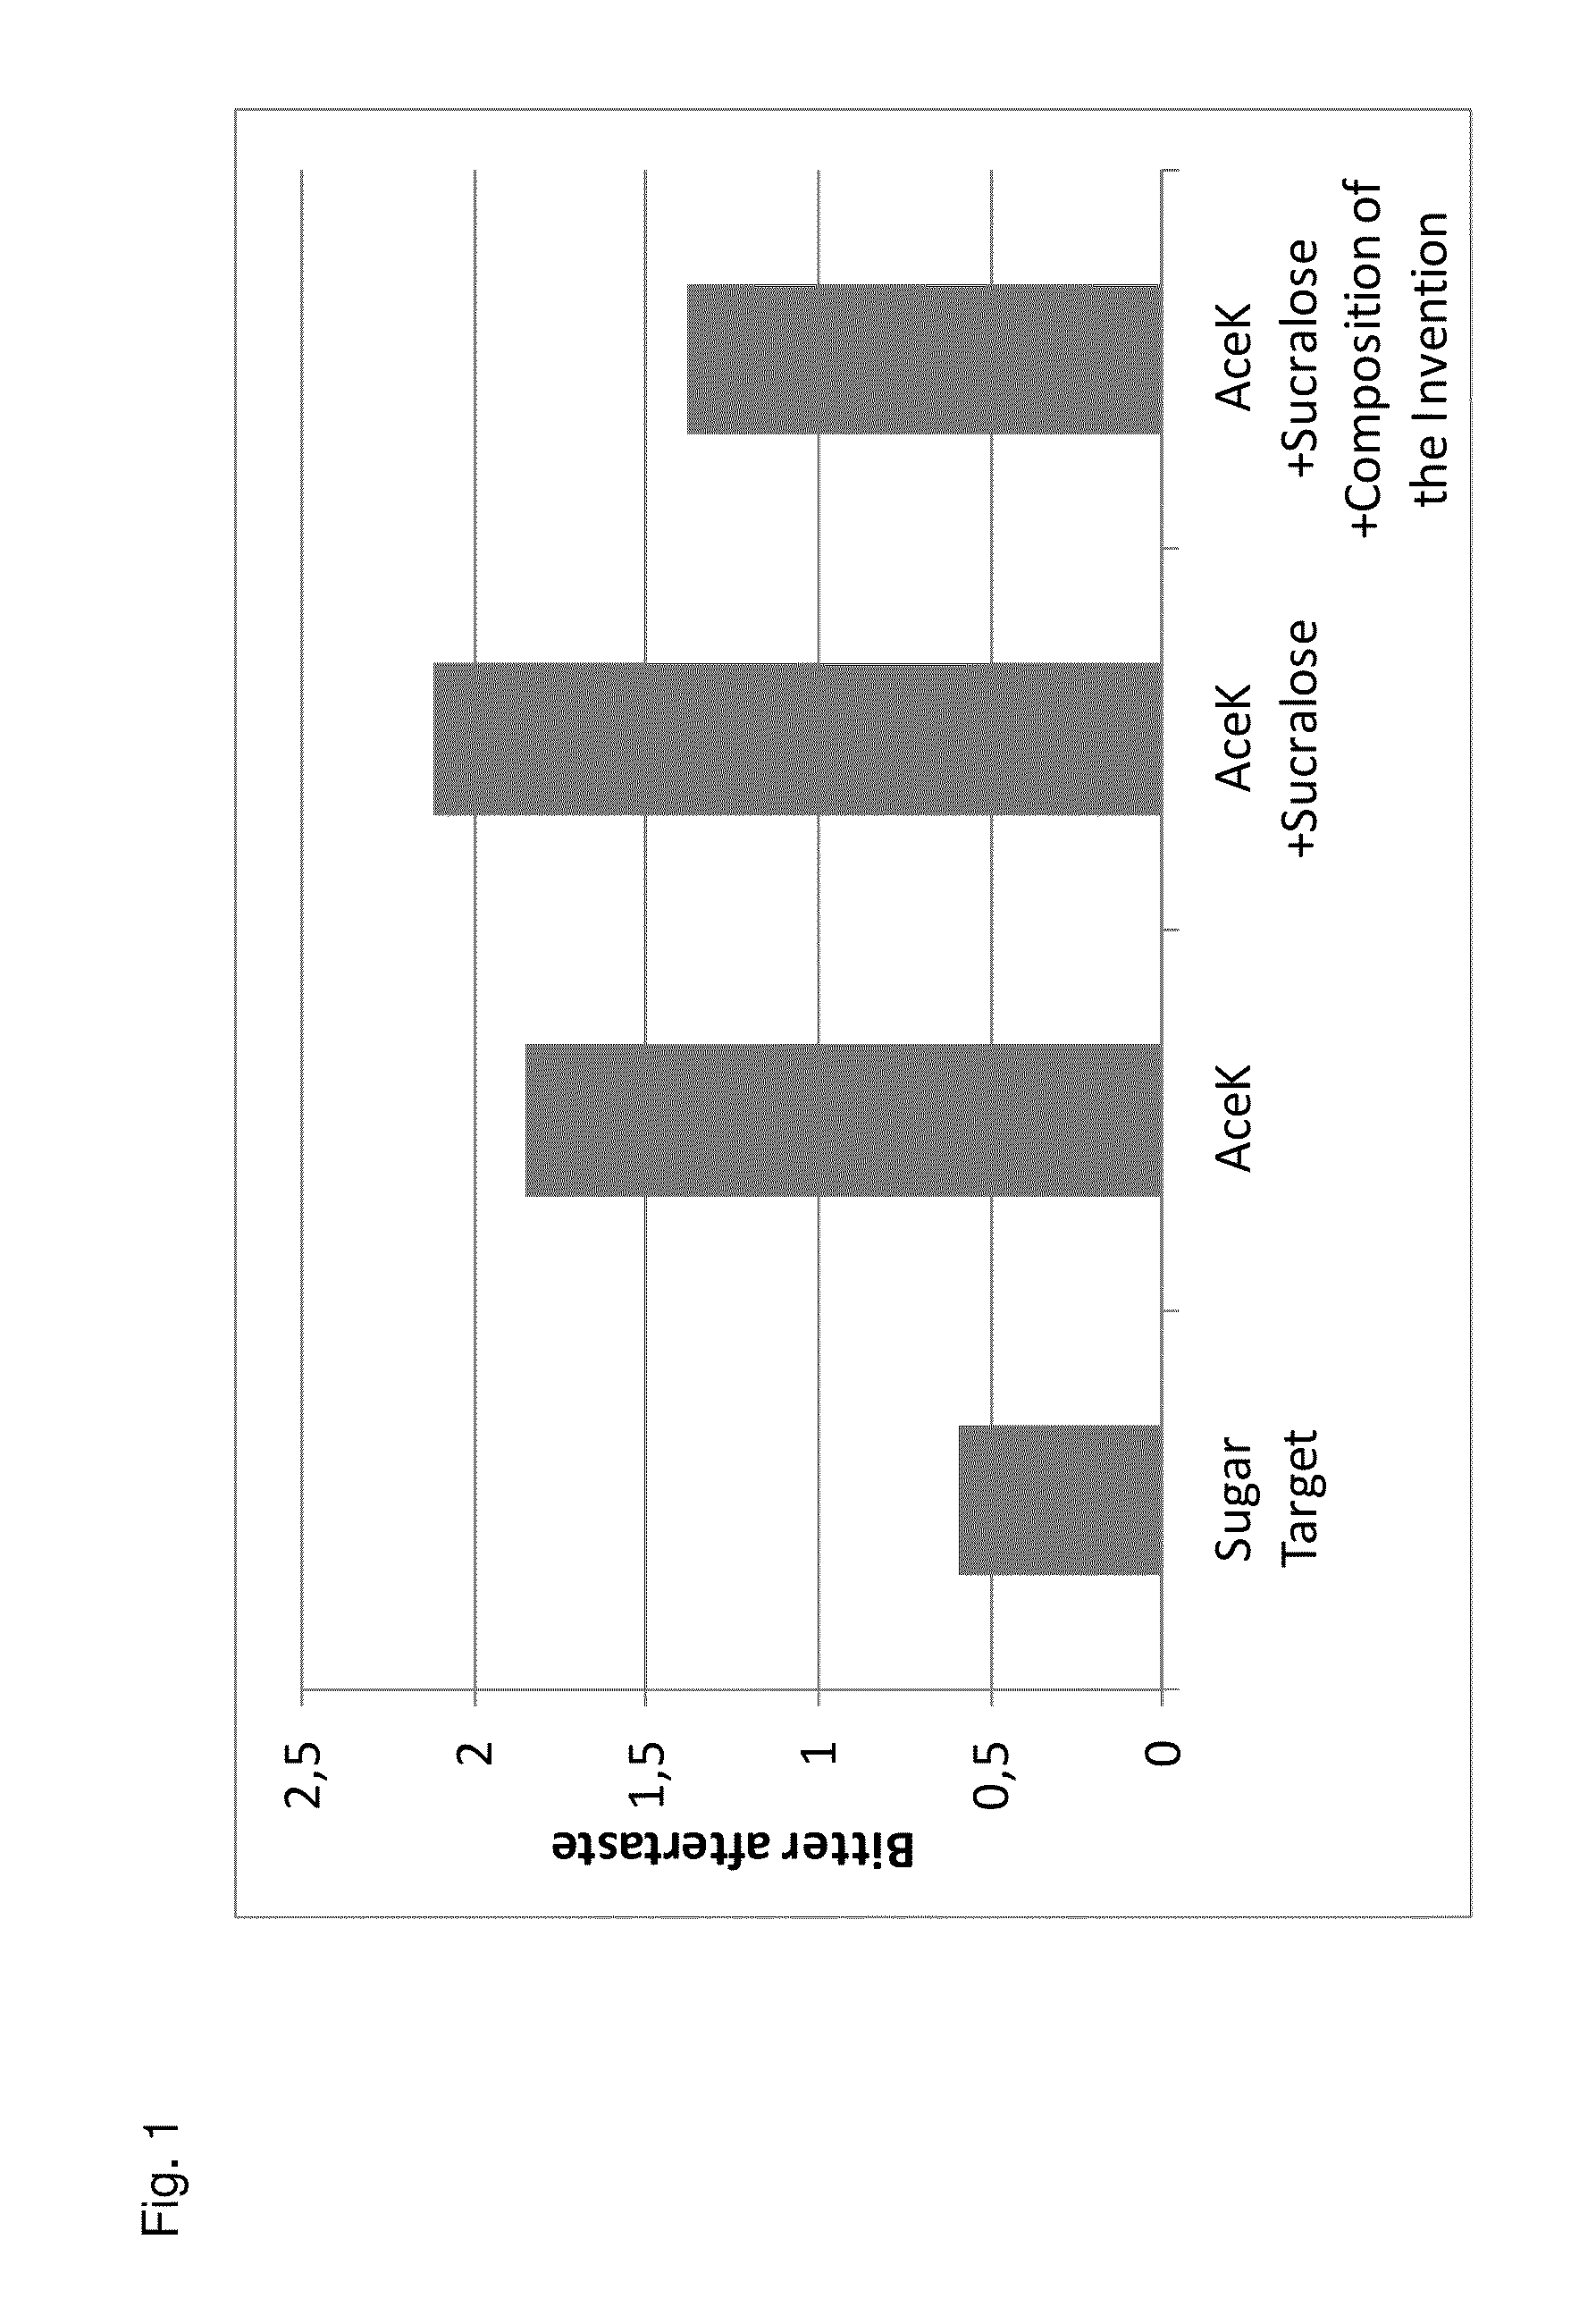 Taste-Masking Compositions, Sweetener Compositions and Consumable Product Compositions Containing the Same